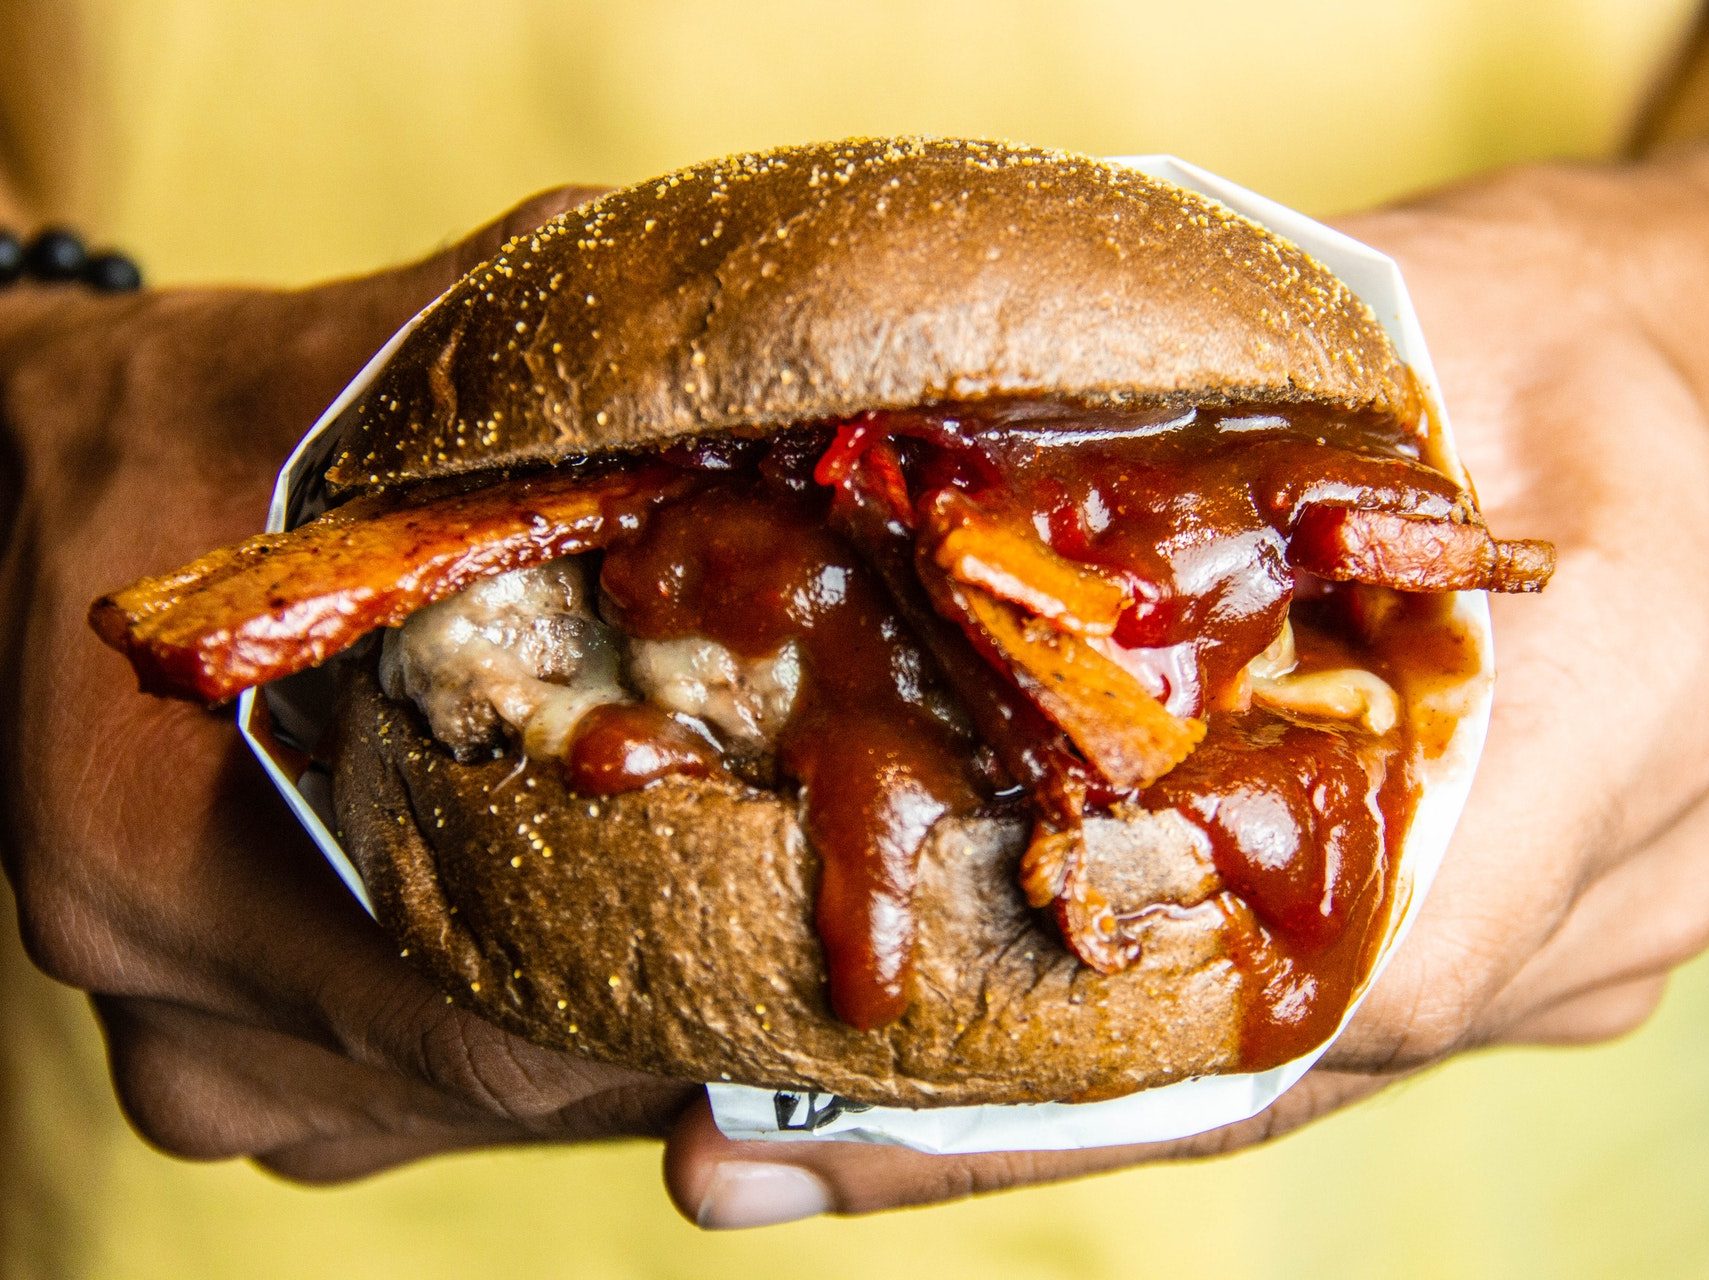 Person holding a juicy BBQ sandwich covered with barbeque sauce